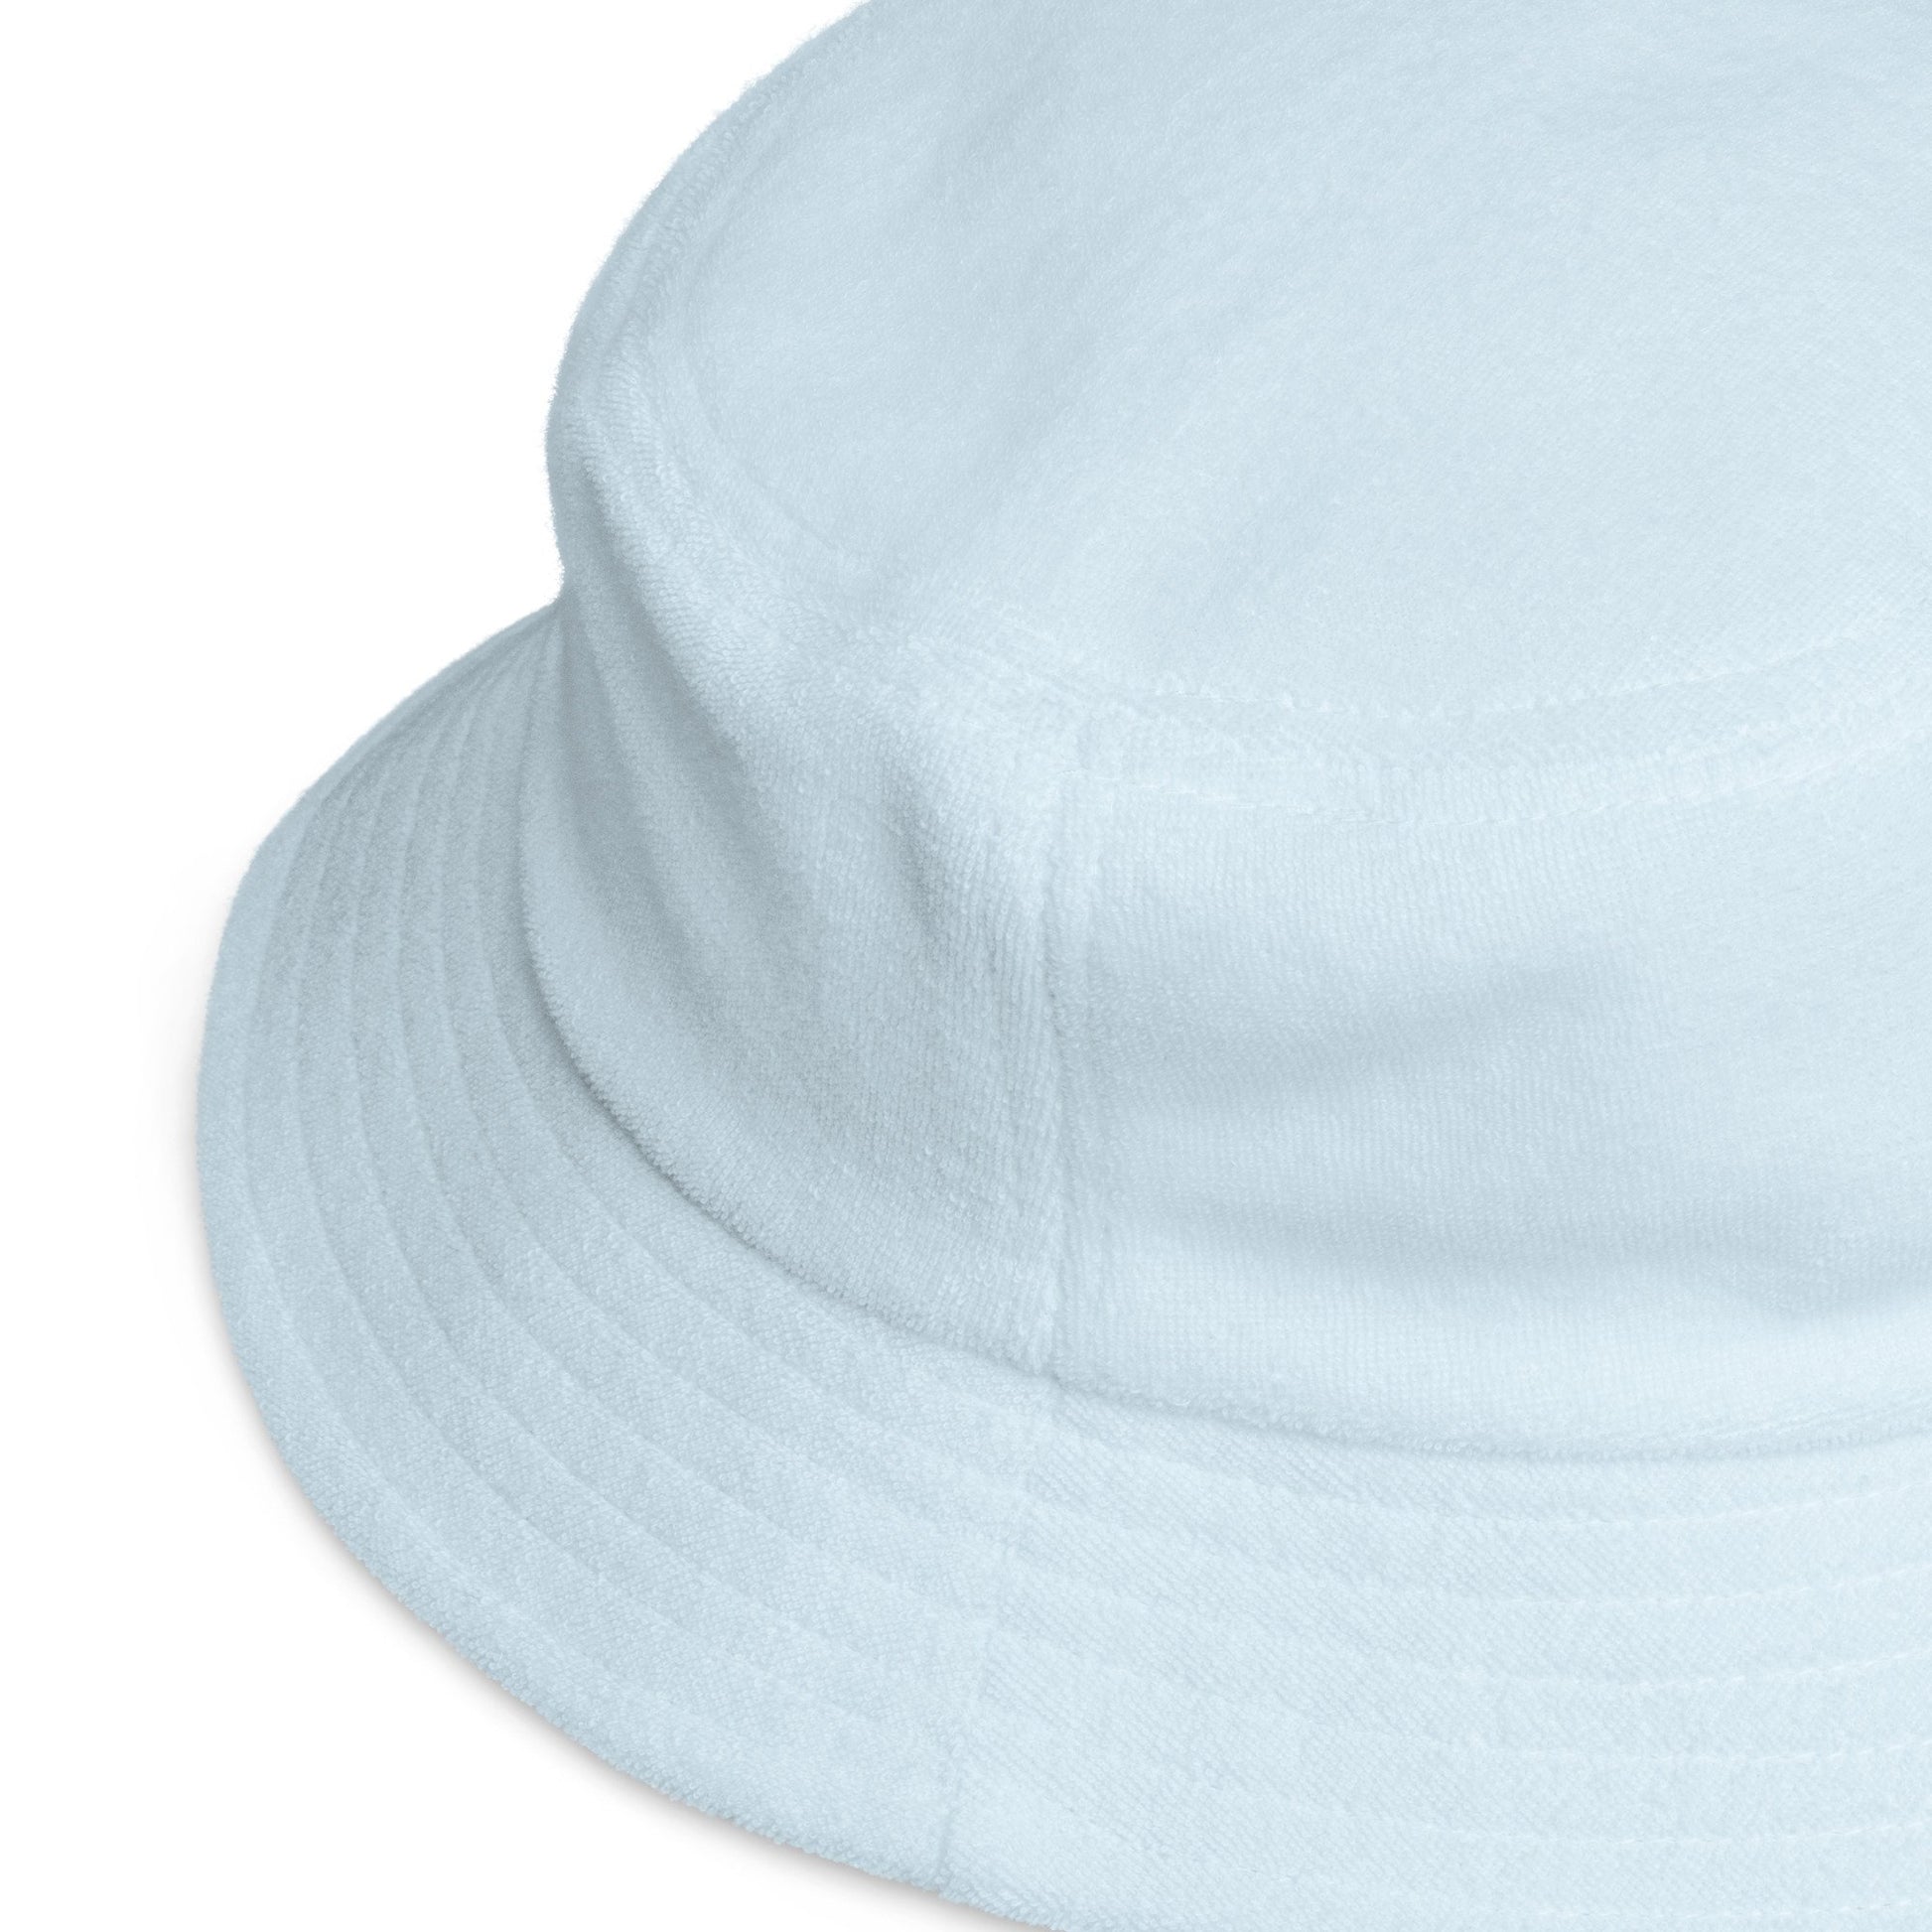 See the Good - Unstructured terry cloth bucket hat